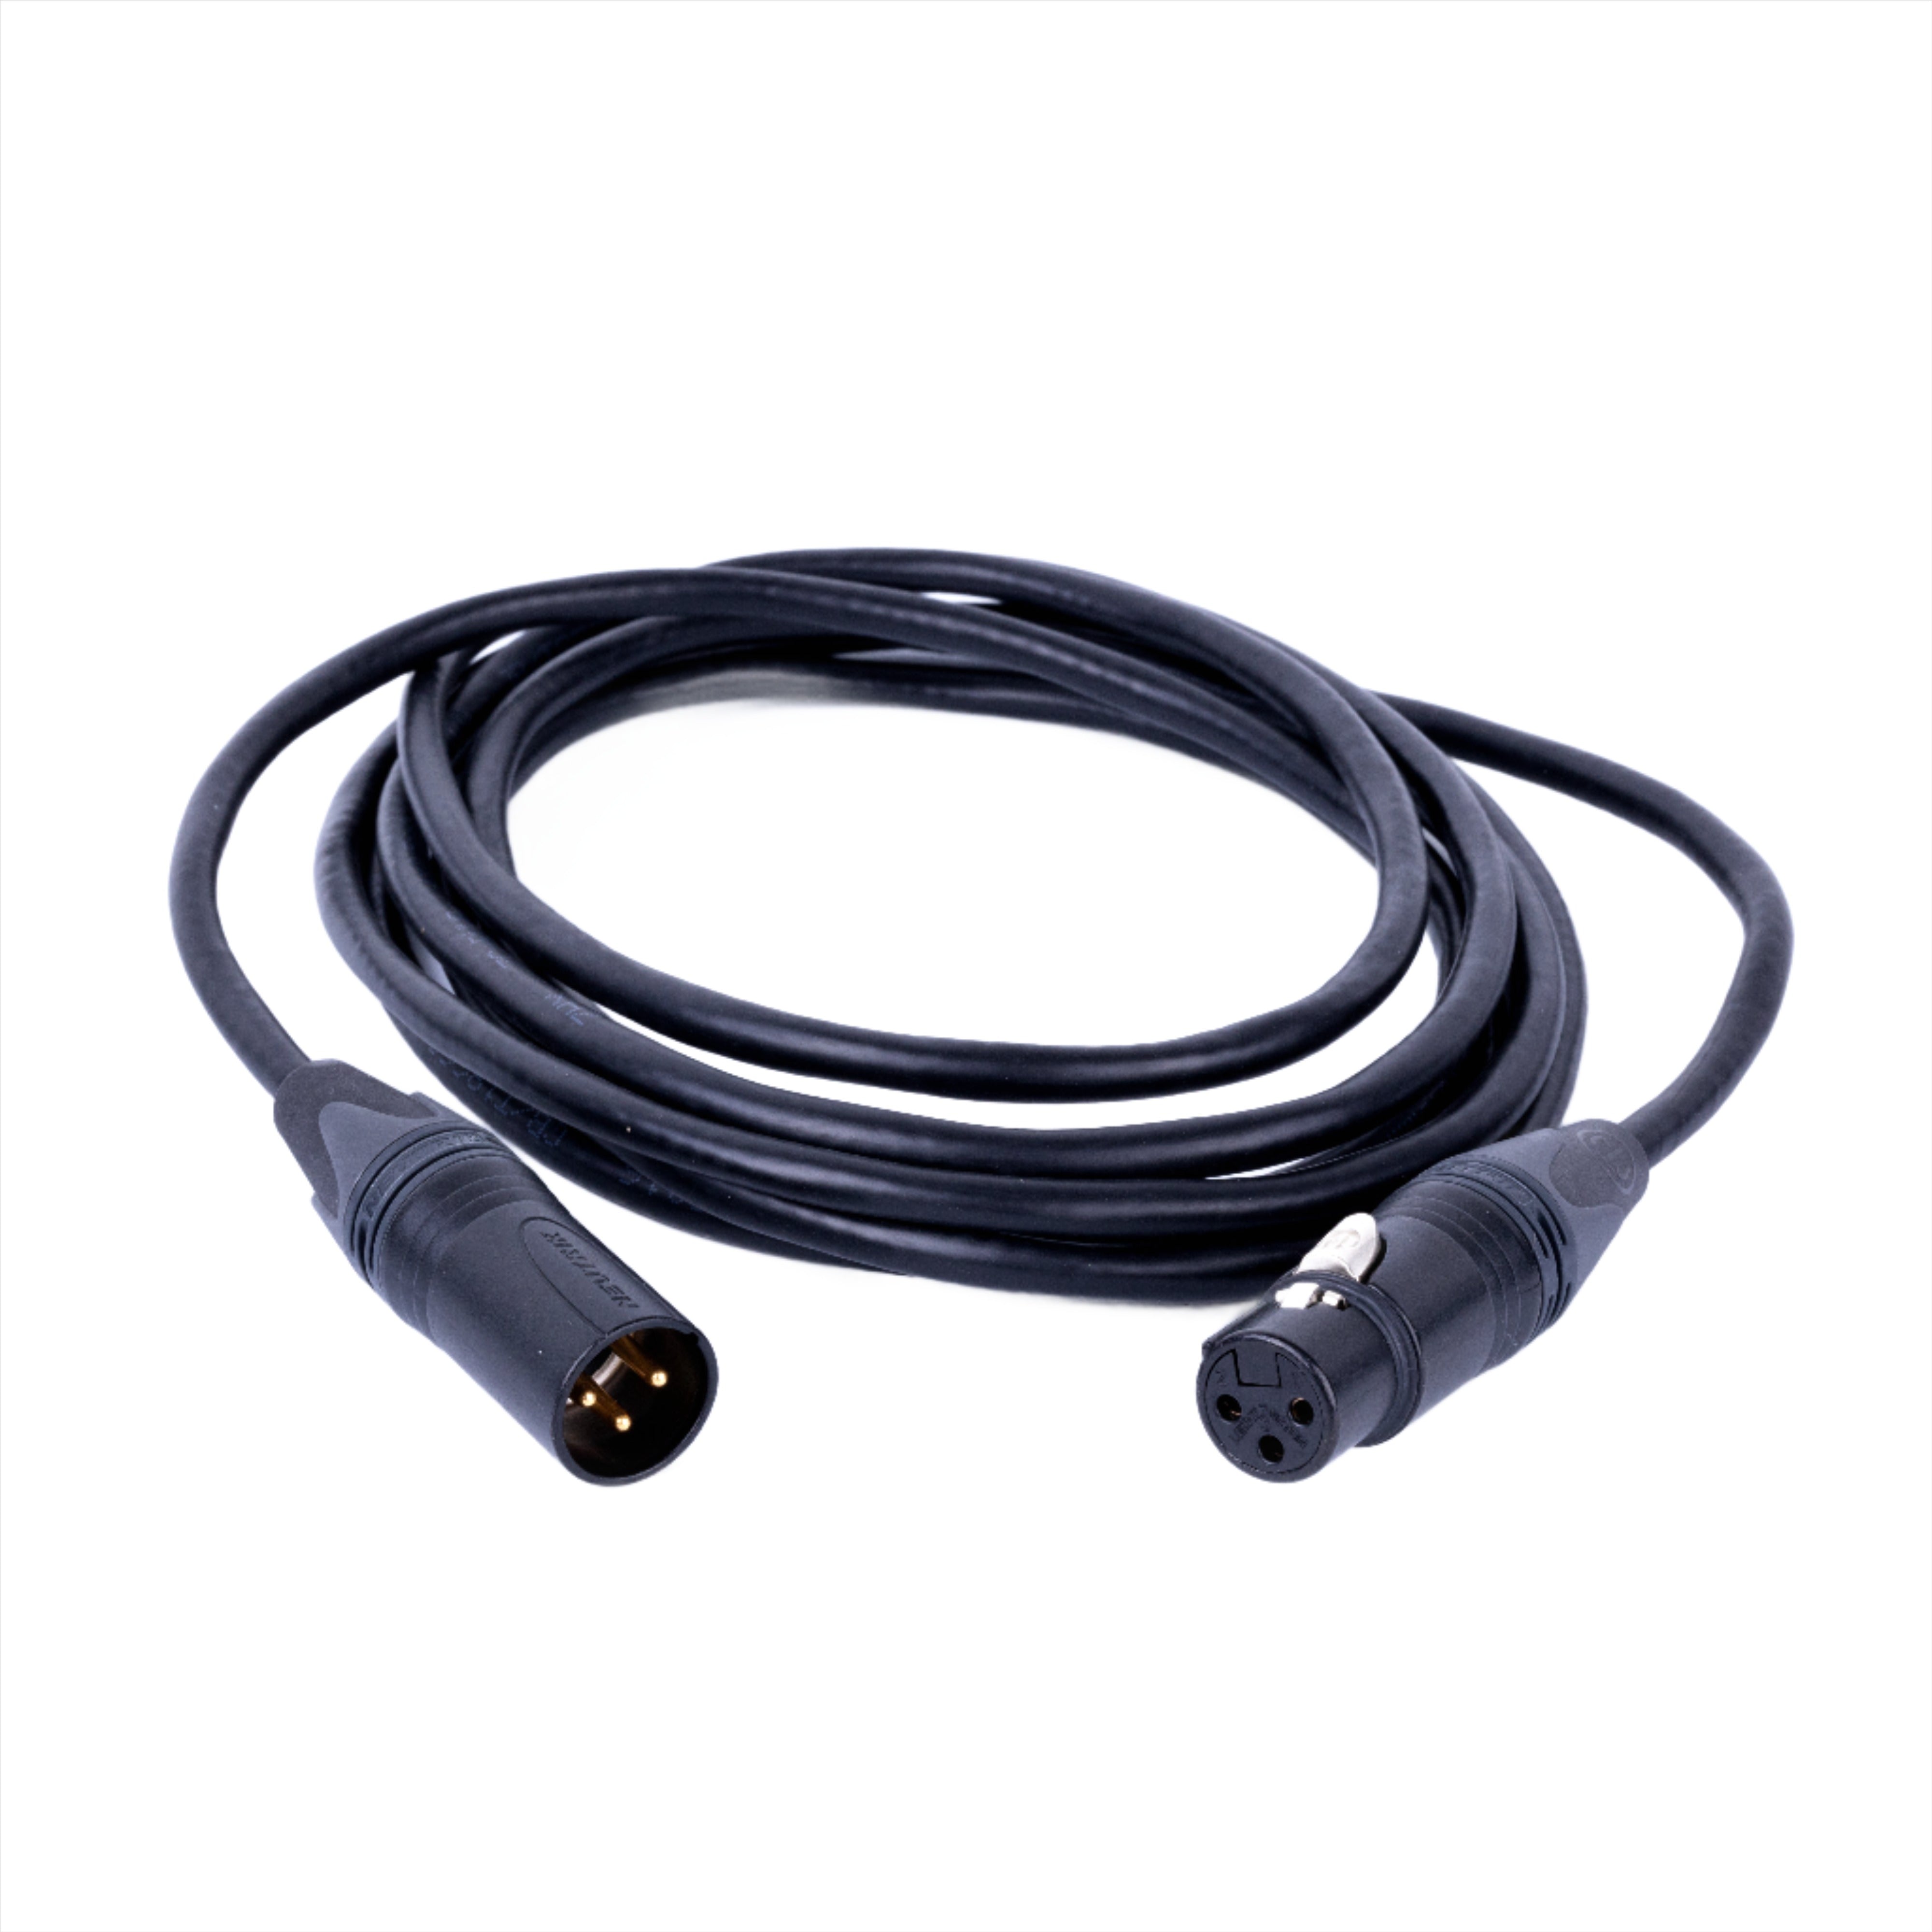 3 pin XLR Power Extension Cable (Male to Female, 120")